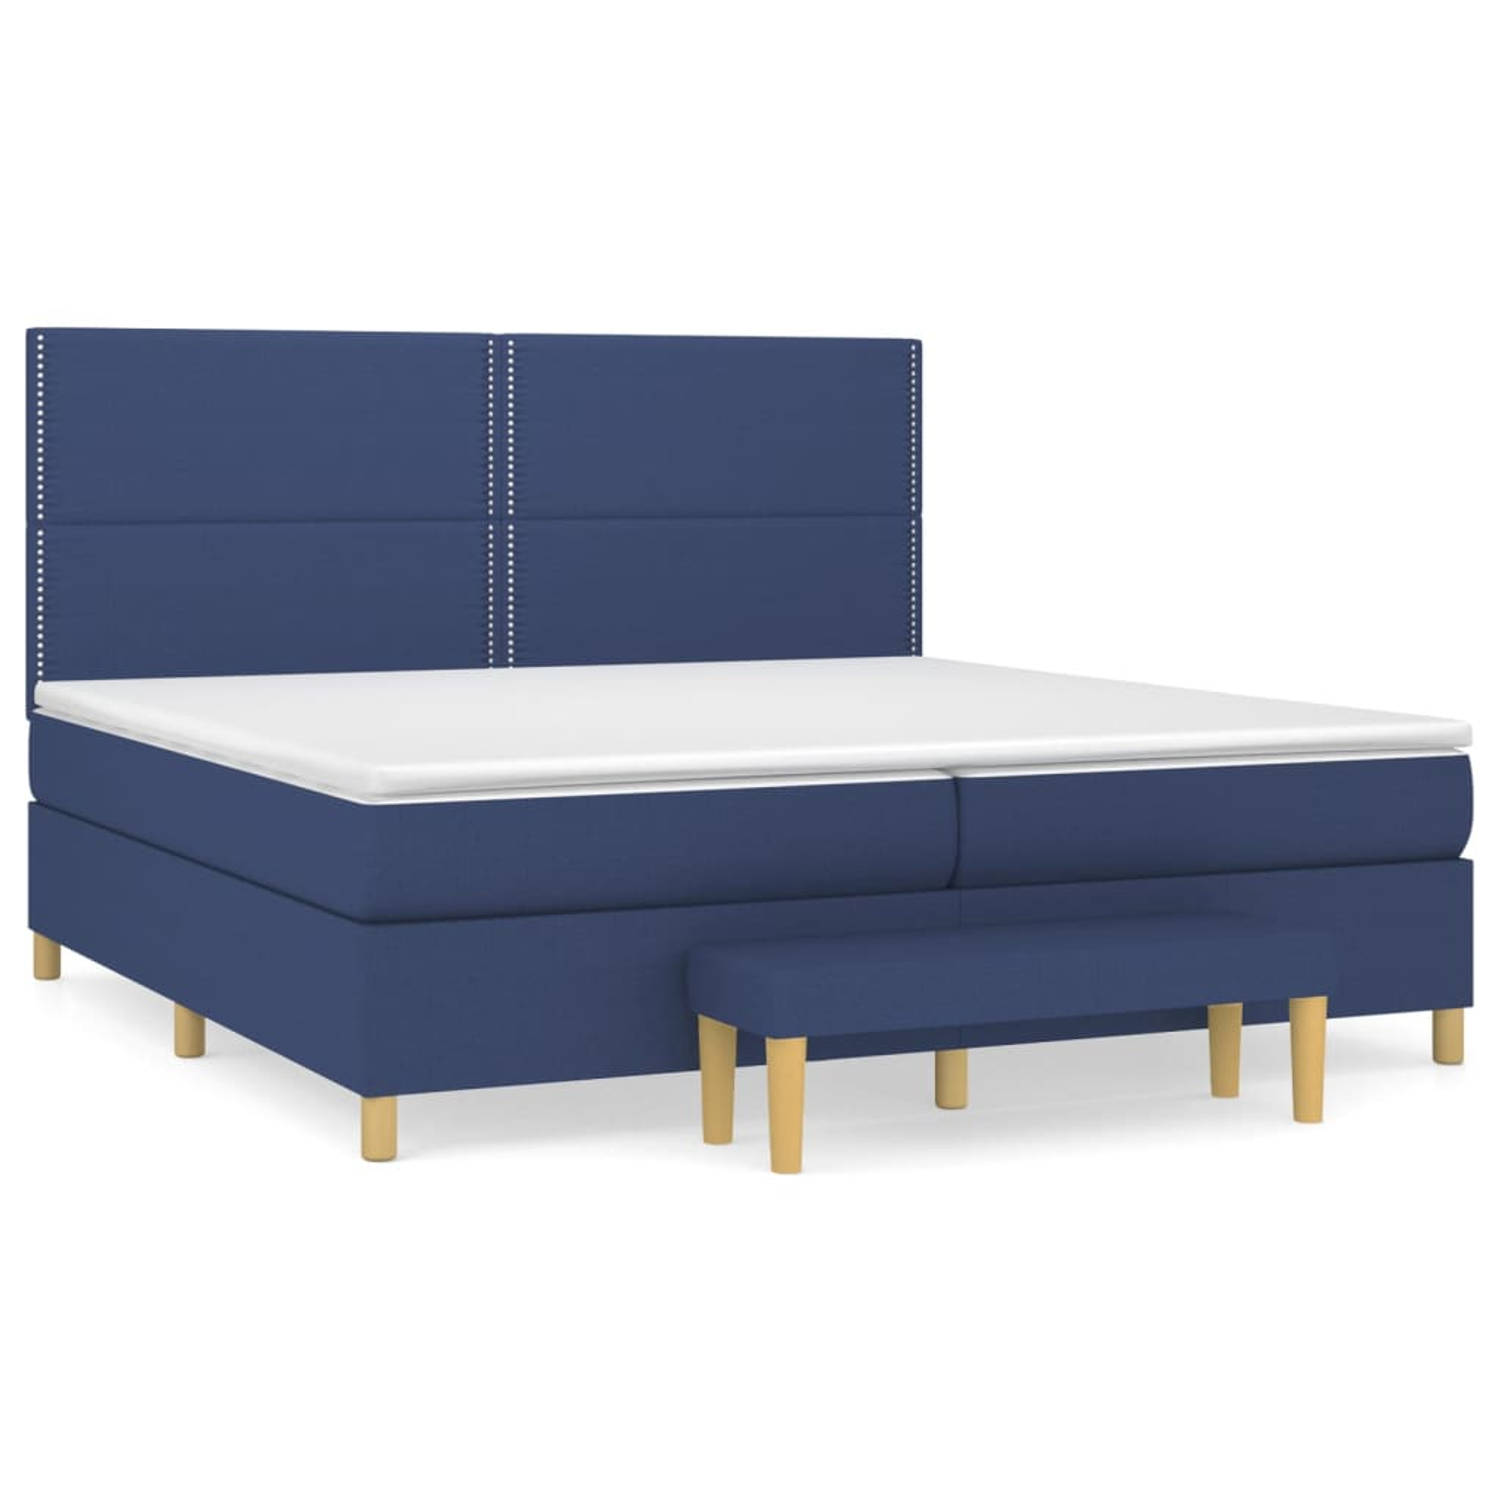 The Living Store Bed - Comfort - Boxspringbed - 203x200x118/128 cm - Blauw